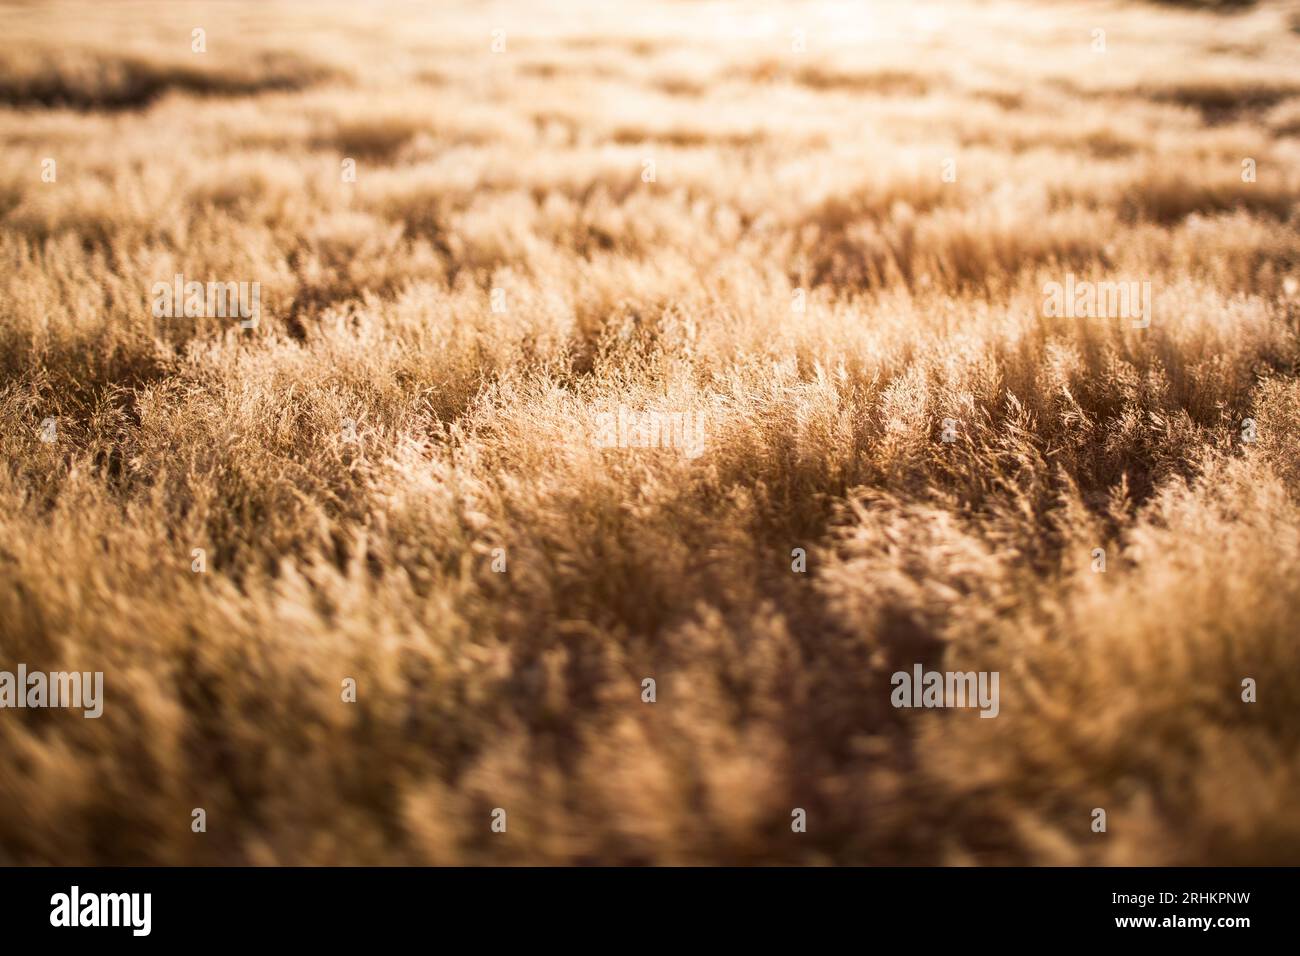 Golden dry grassy foliage in Namibia tilt-shift photography dream landscape travel tourism nature abstract Stock Photo